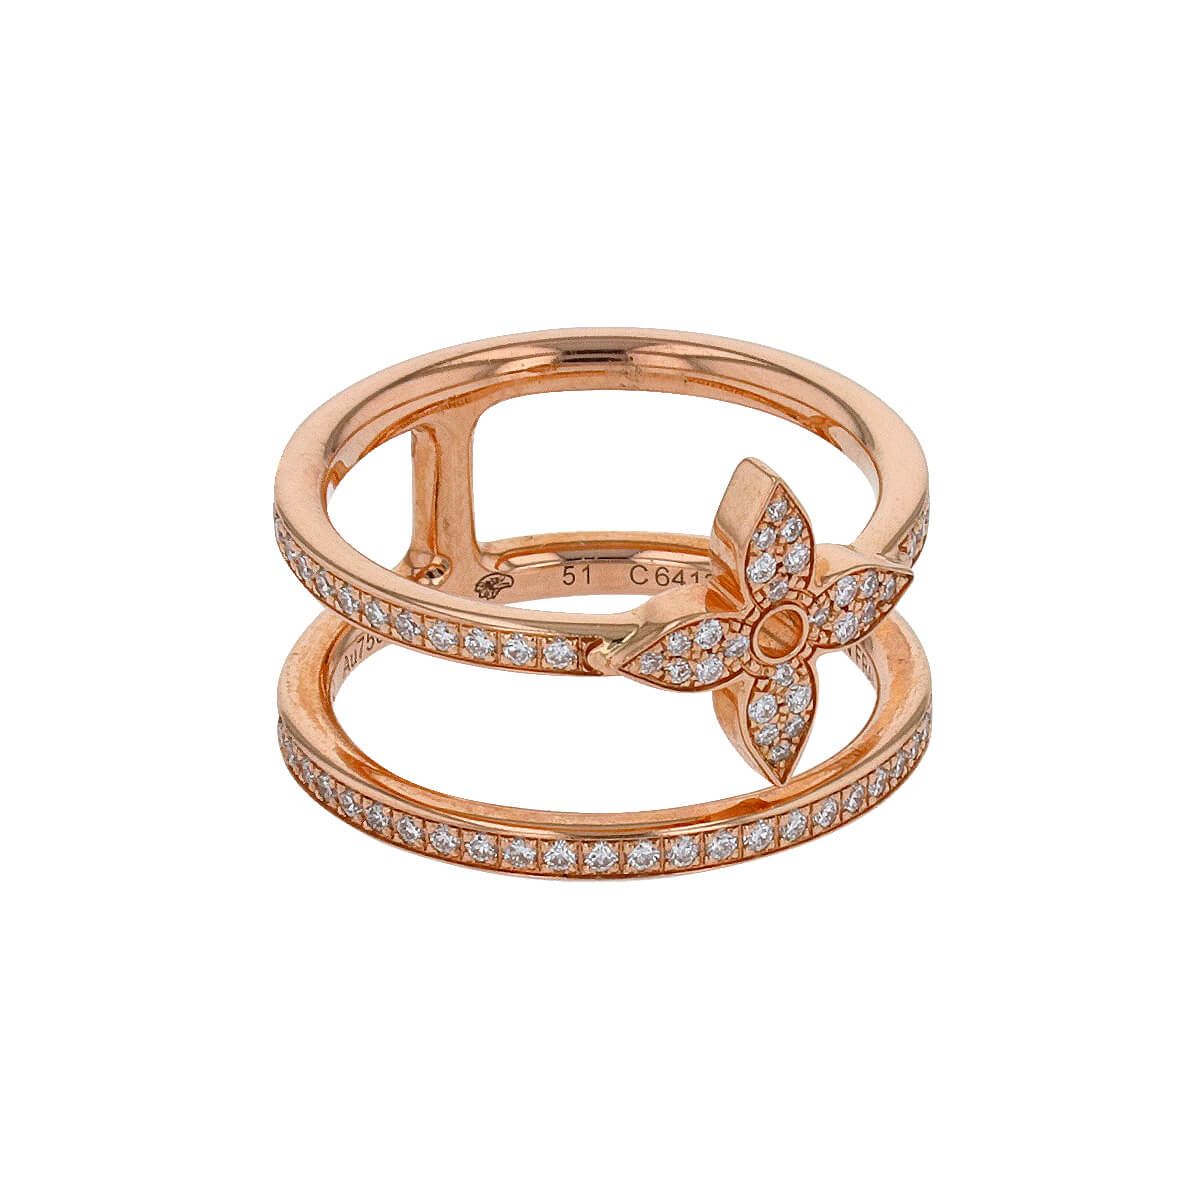 Idylle Blossom Two-Row Bracelet, Pink Gold And Diamonds - Jewelry -  Categories